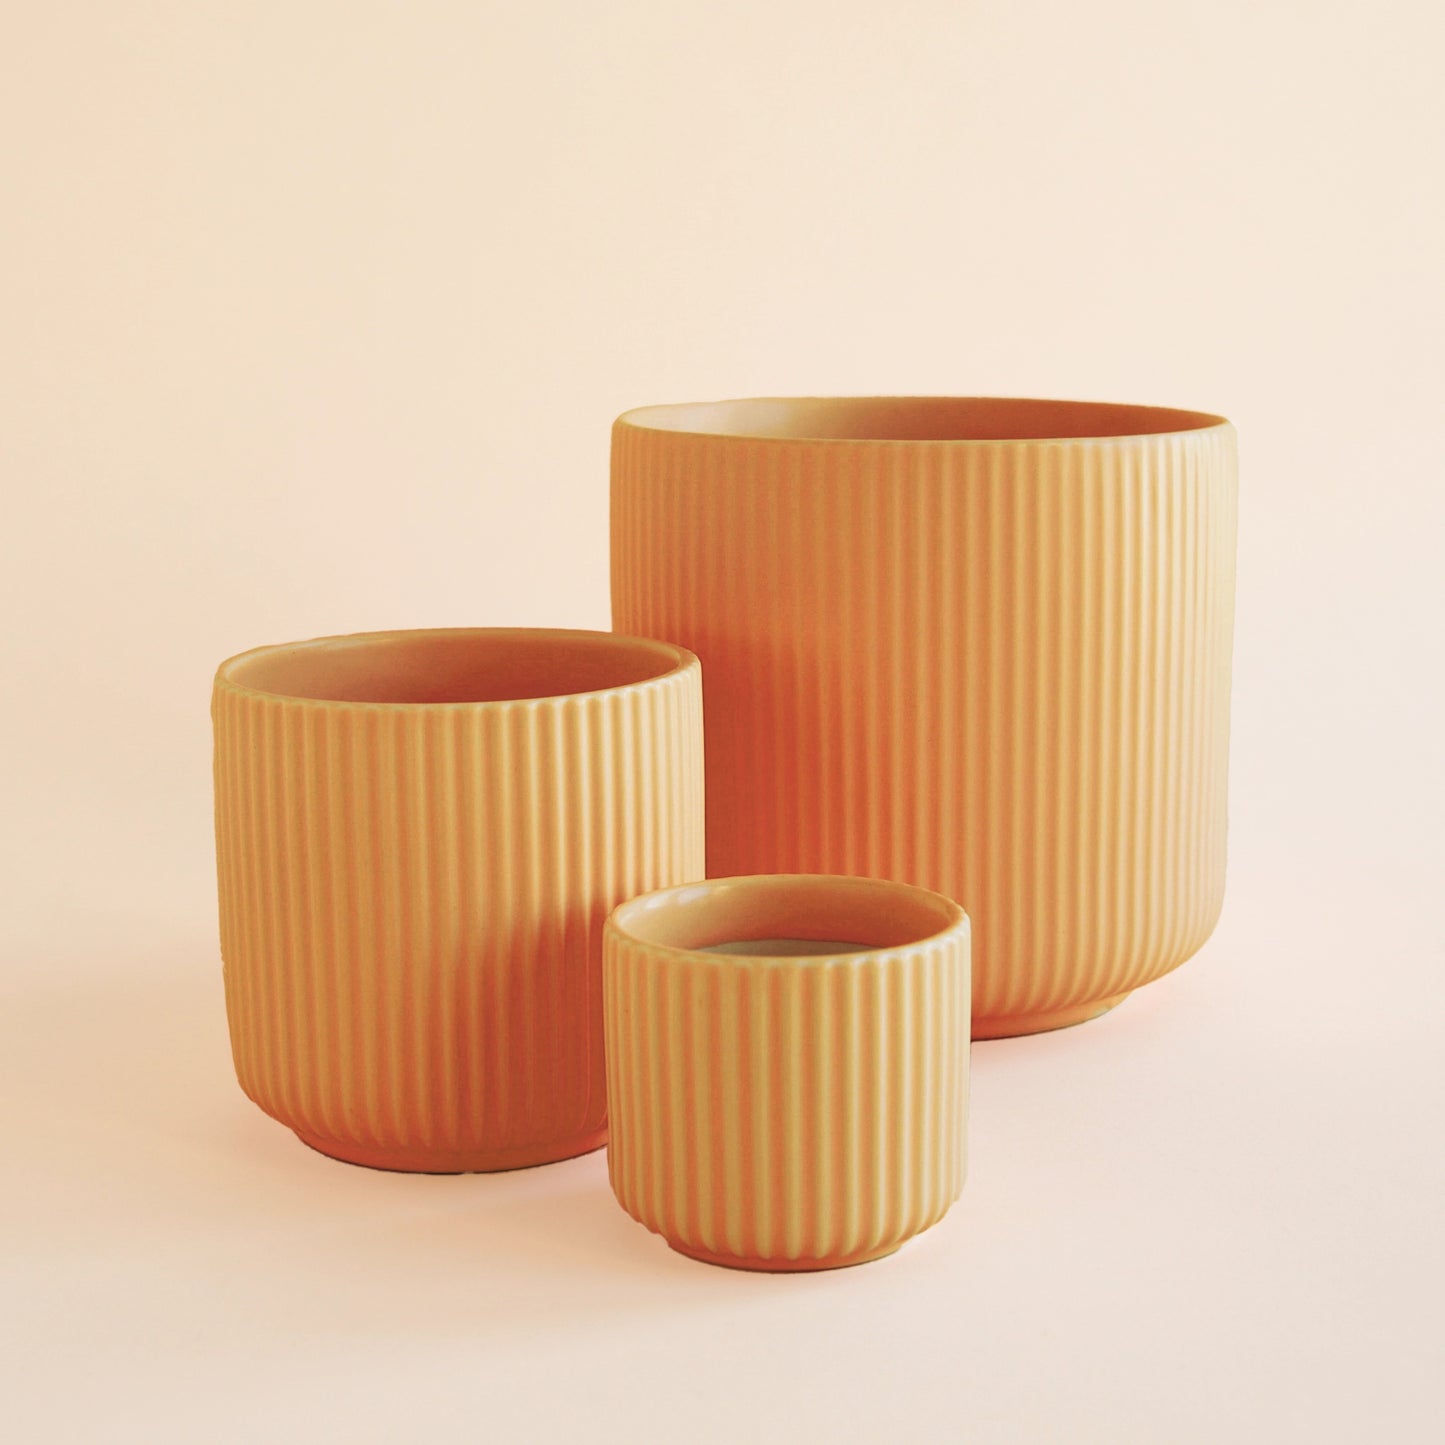 On an ivory background is three different sized orange ceramic planters with a fluted detail and a rounded base. 